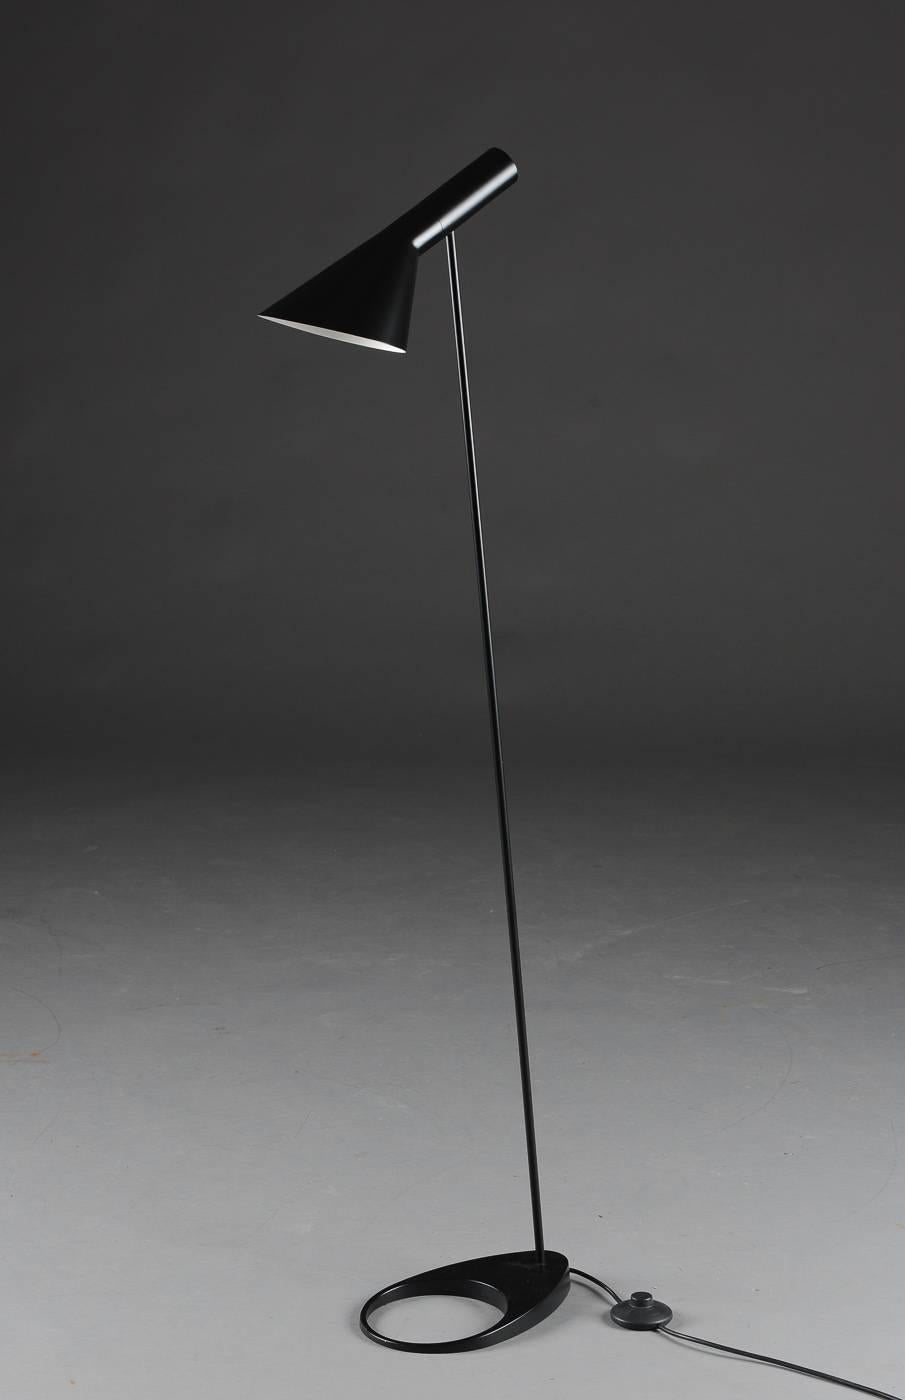 AJ floor lamp, Classic floor lamp designed by the world renowned architect and designer Arne Jacobsen in 1957, produced by Louis Poulsen.
Very good condition! Iconic Danish lighting design!

Timeless floor lamp with its sleek conical shade, made